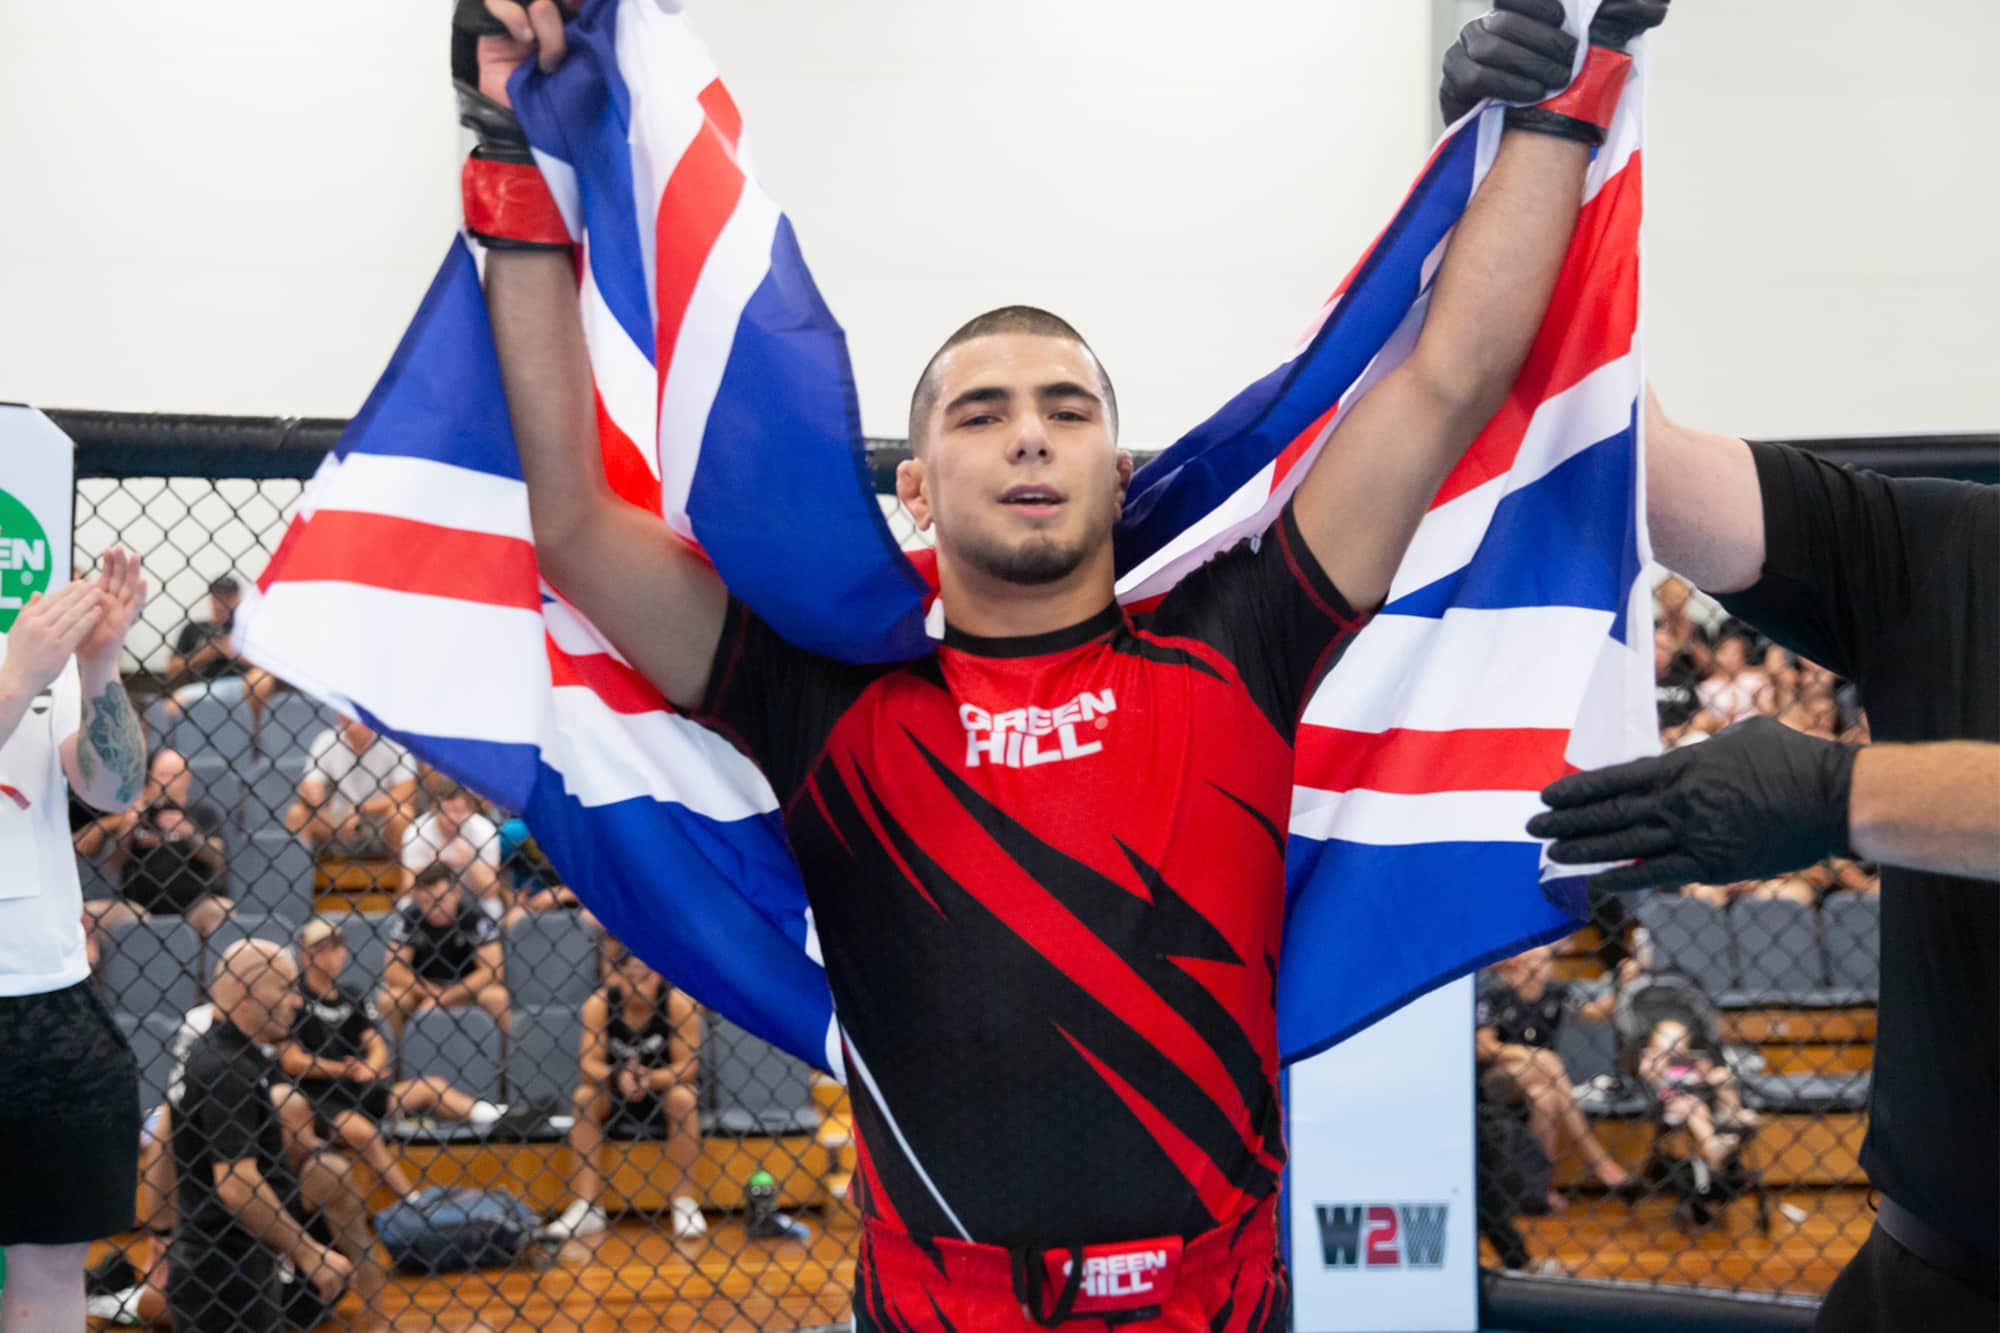 Two IMMAF star alumni are back, with Mokaev and Sola looking for wins this weekend in Brave CF 54